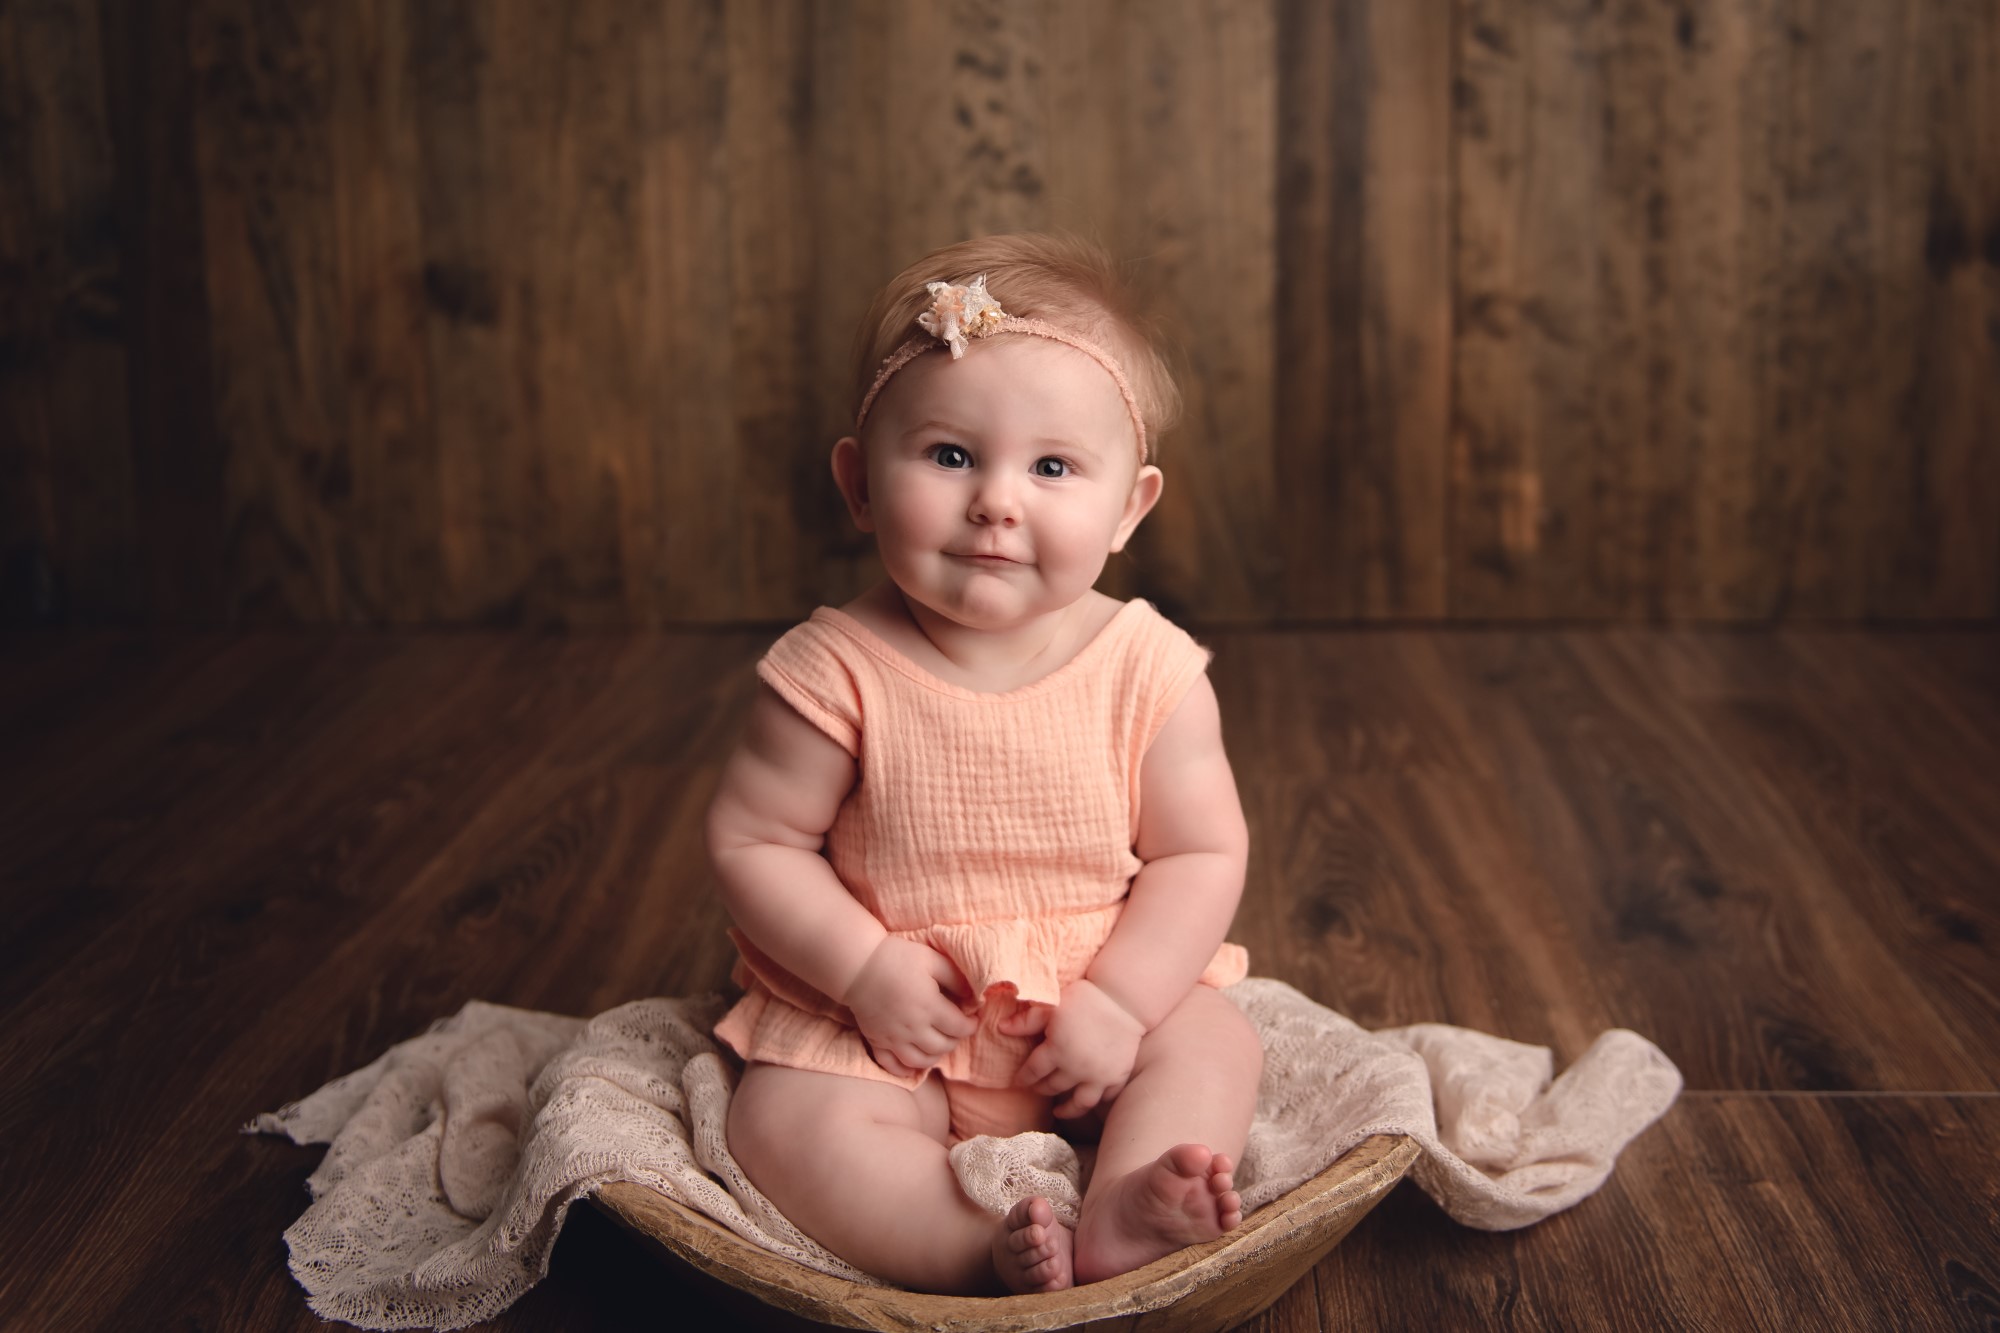 professional baby photographer in holly springs ga - courtney elise photography